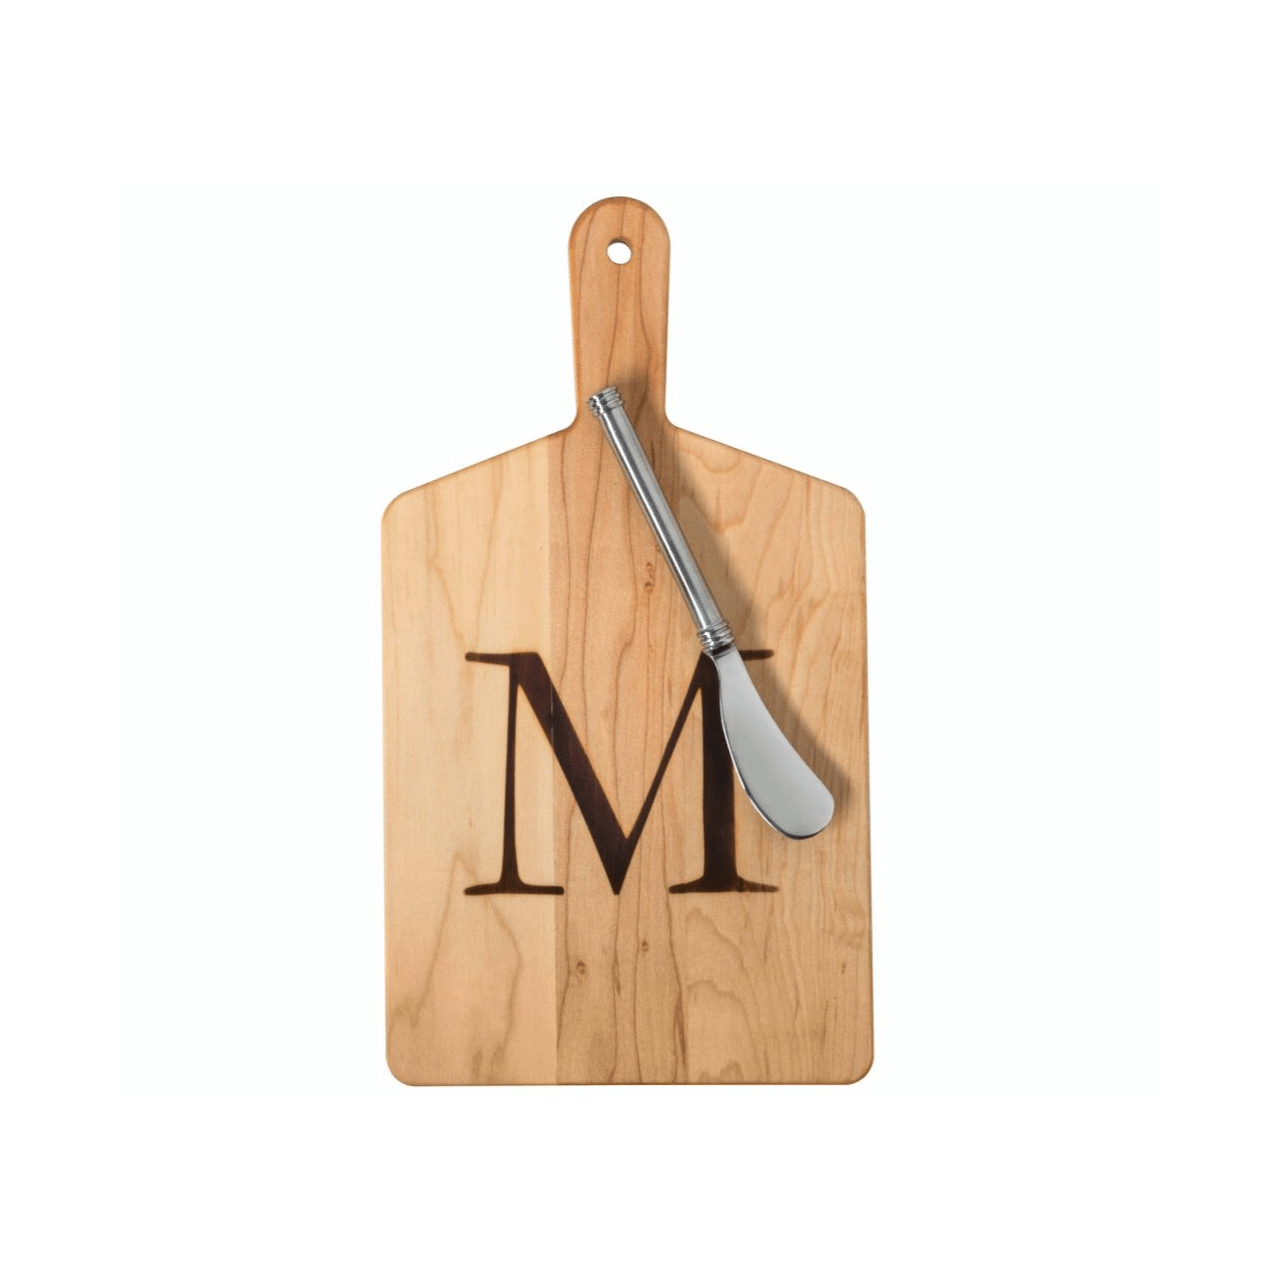 Maple Cheese Board with a Stamped O and Metal Spreader